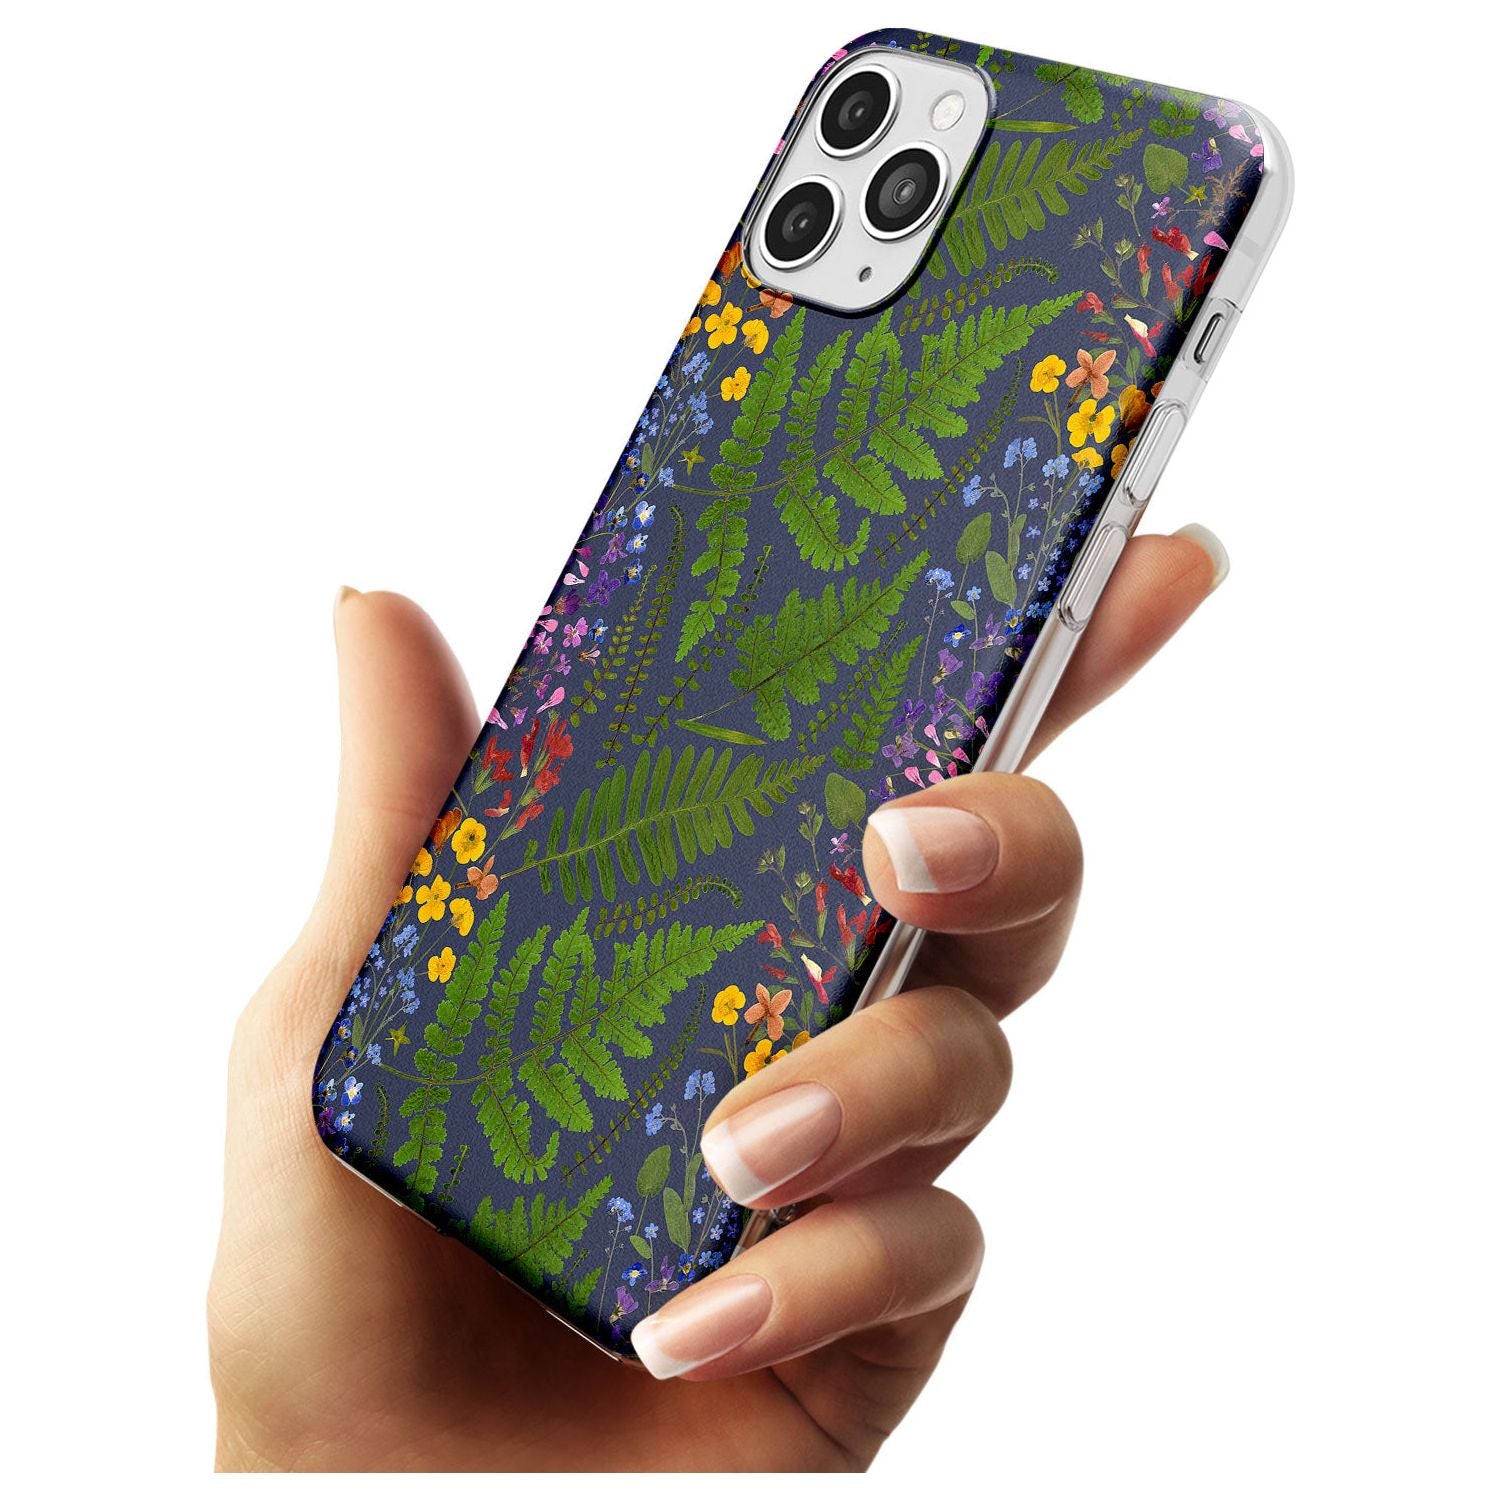 Busy Floral and Fern Design - Navy Slim TPU Phone Case for iPhone 11 Pro Max